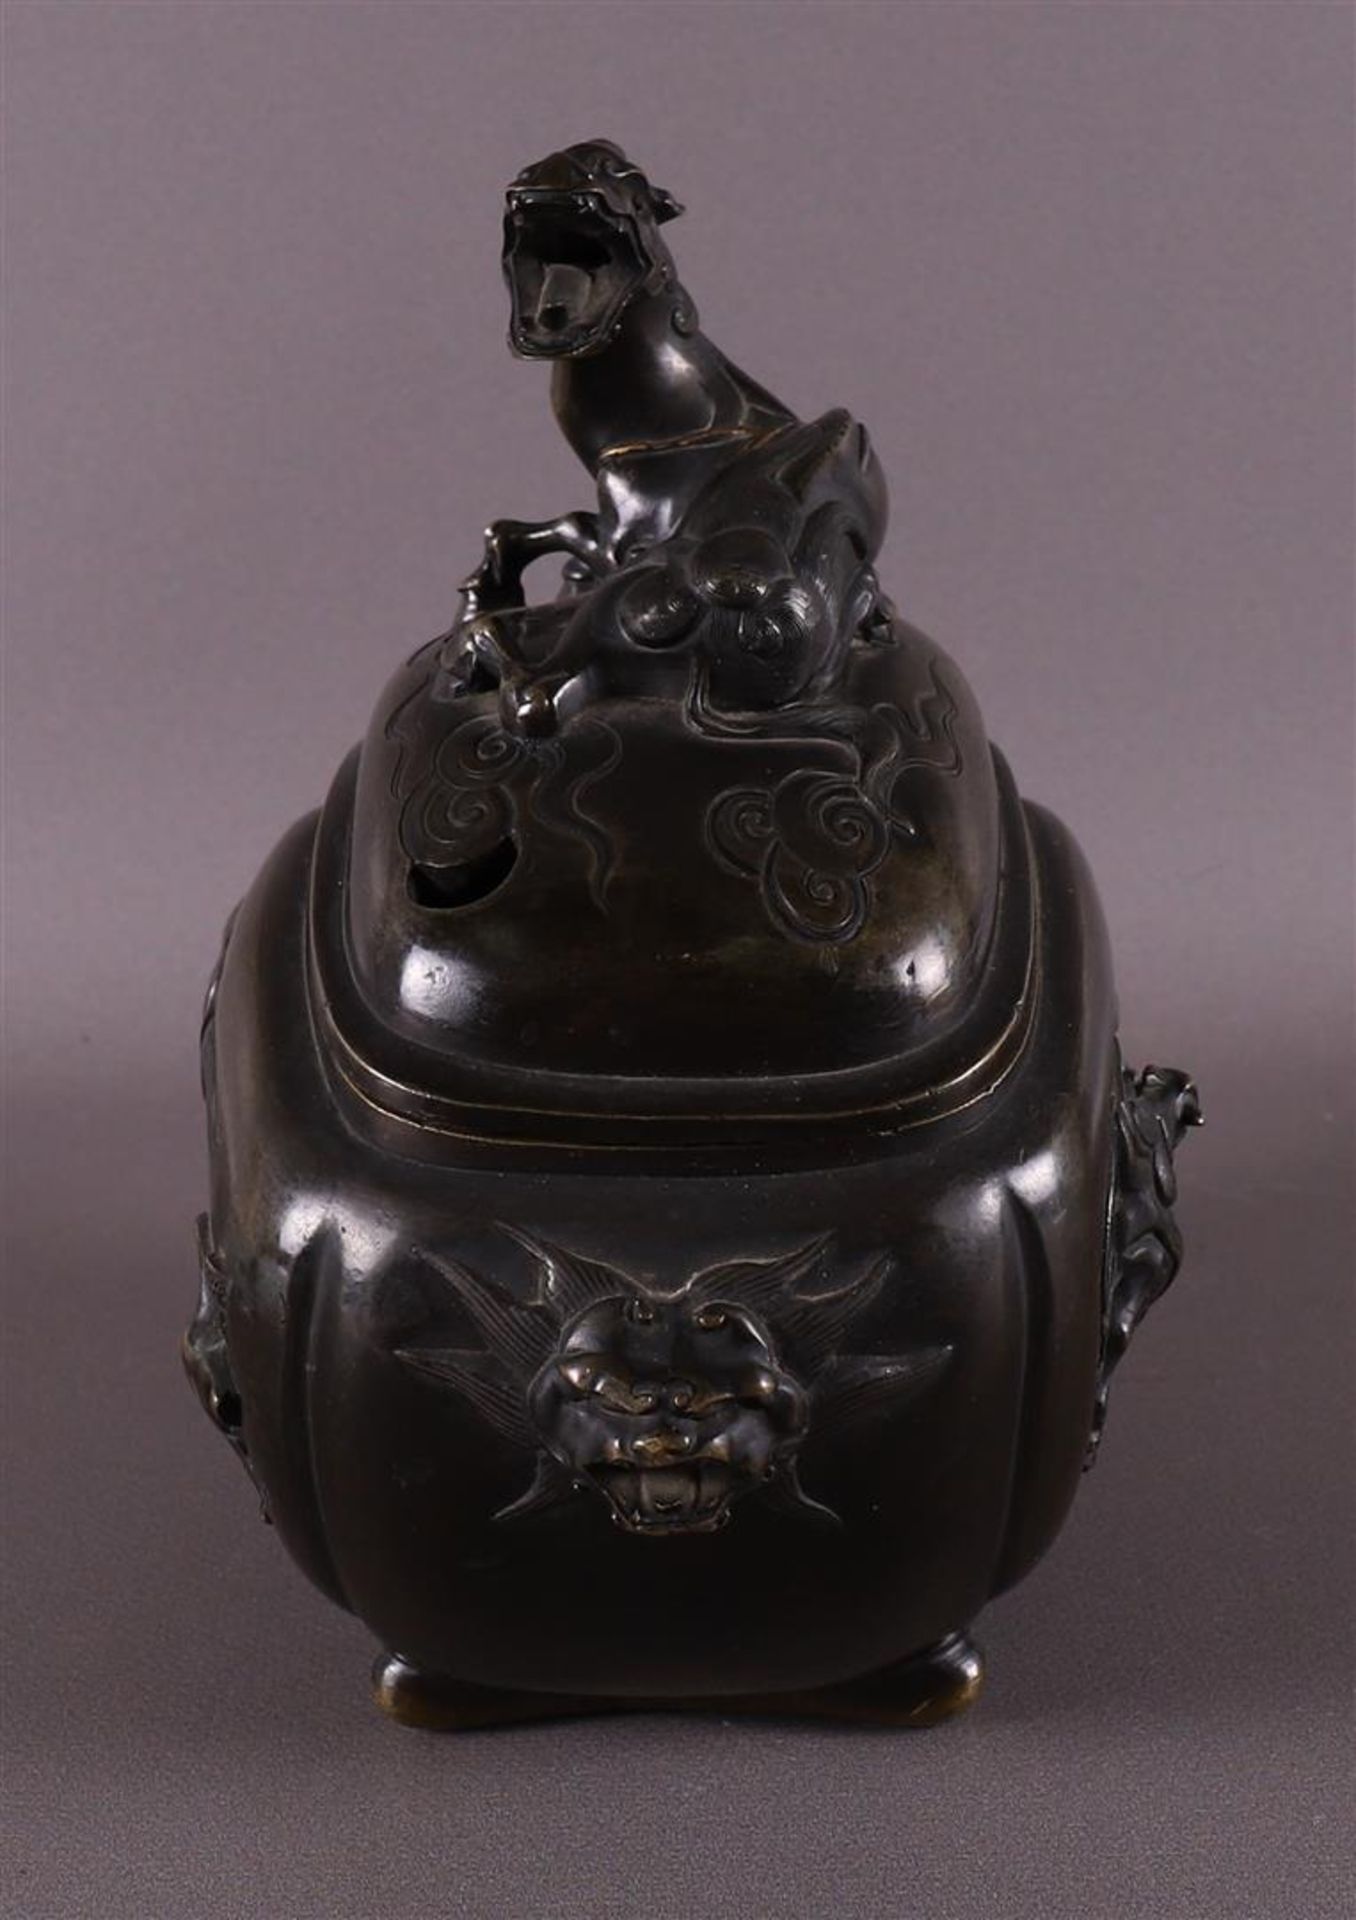 A brown patinated koro with dragon heads for ears, China, 2nd half 19th century. - Bild 5 aus 9